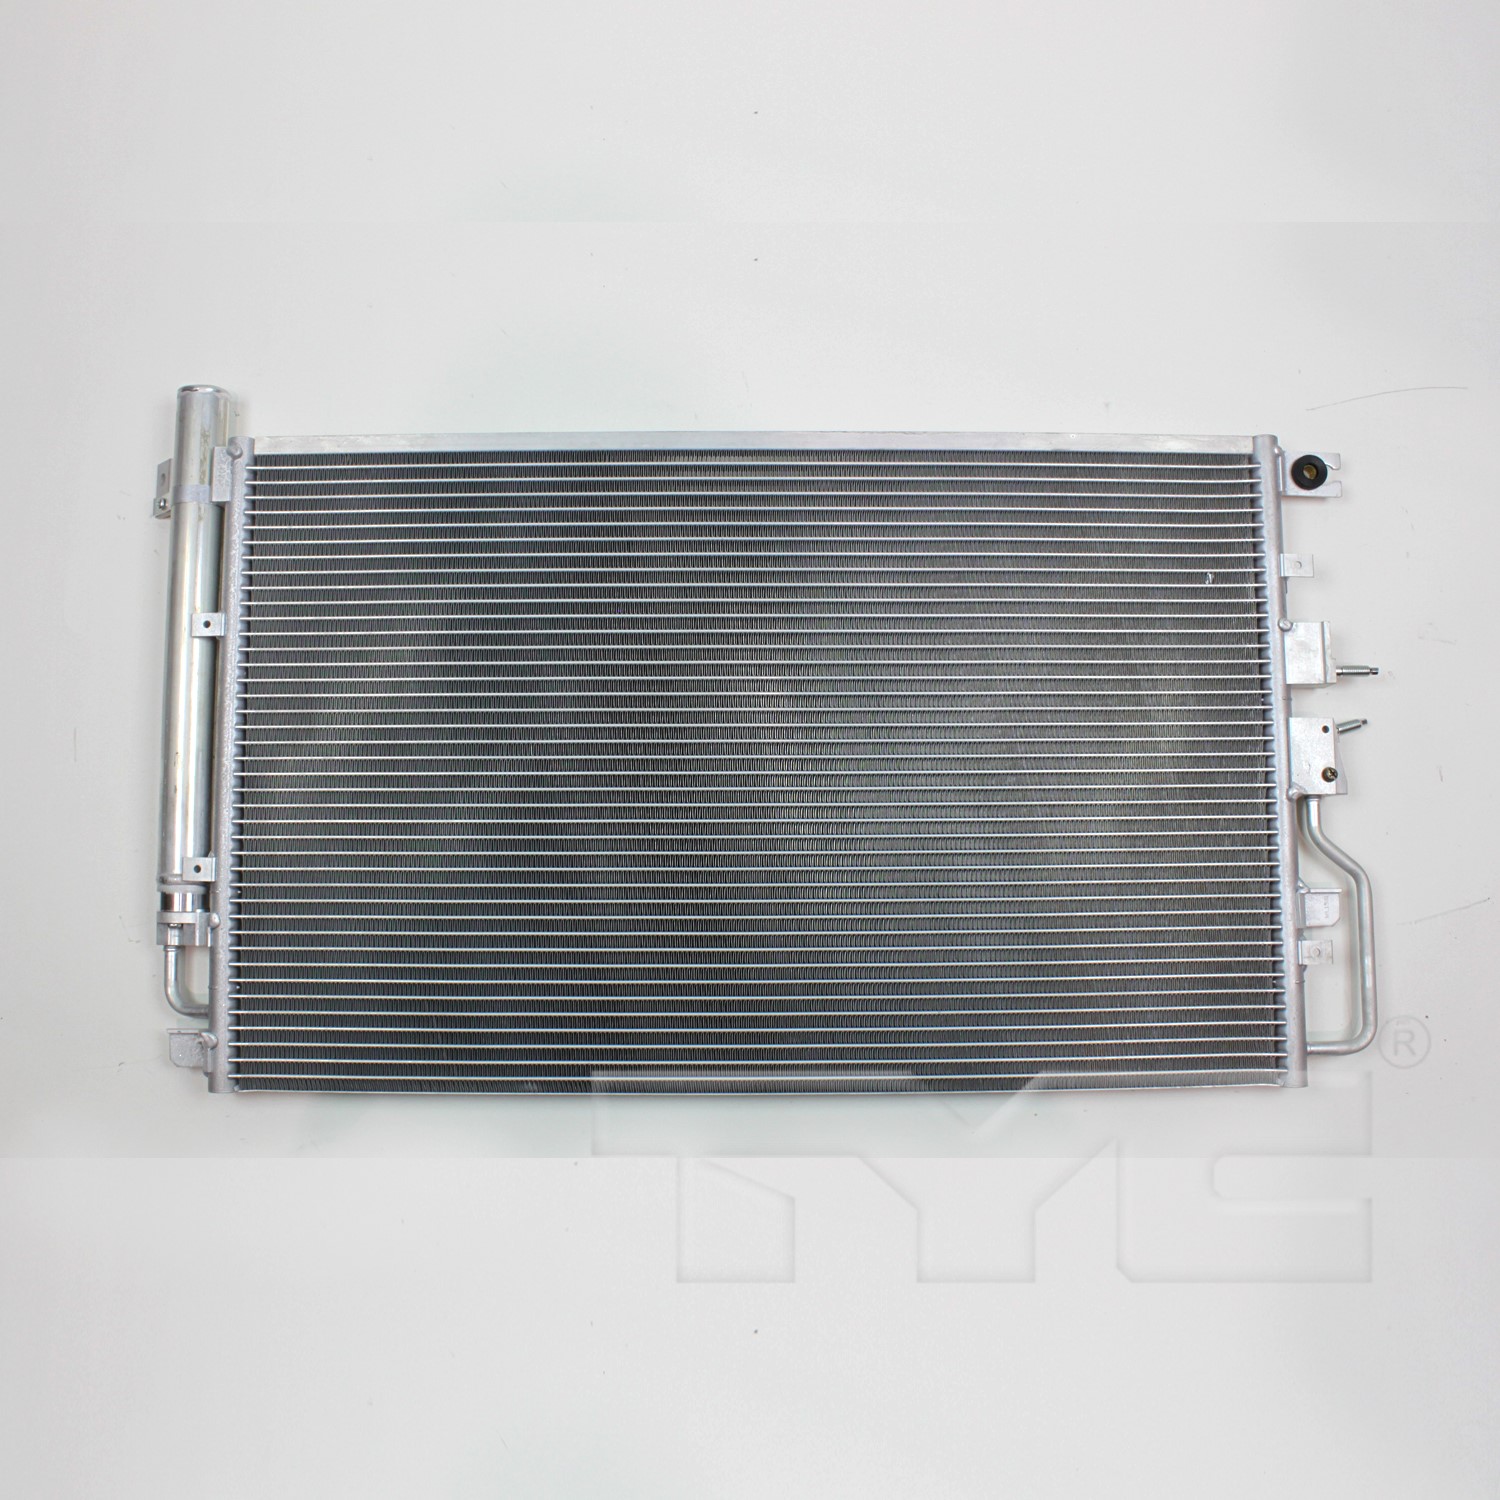 Aftermarket AC CONDENSERS for CHEVROLET - EQUINOX, EQUINOX,10-17,Air conditioning condenser